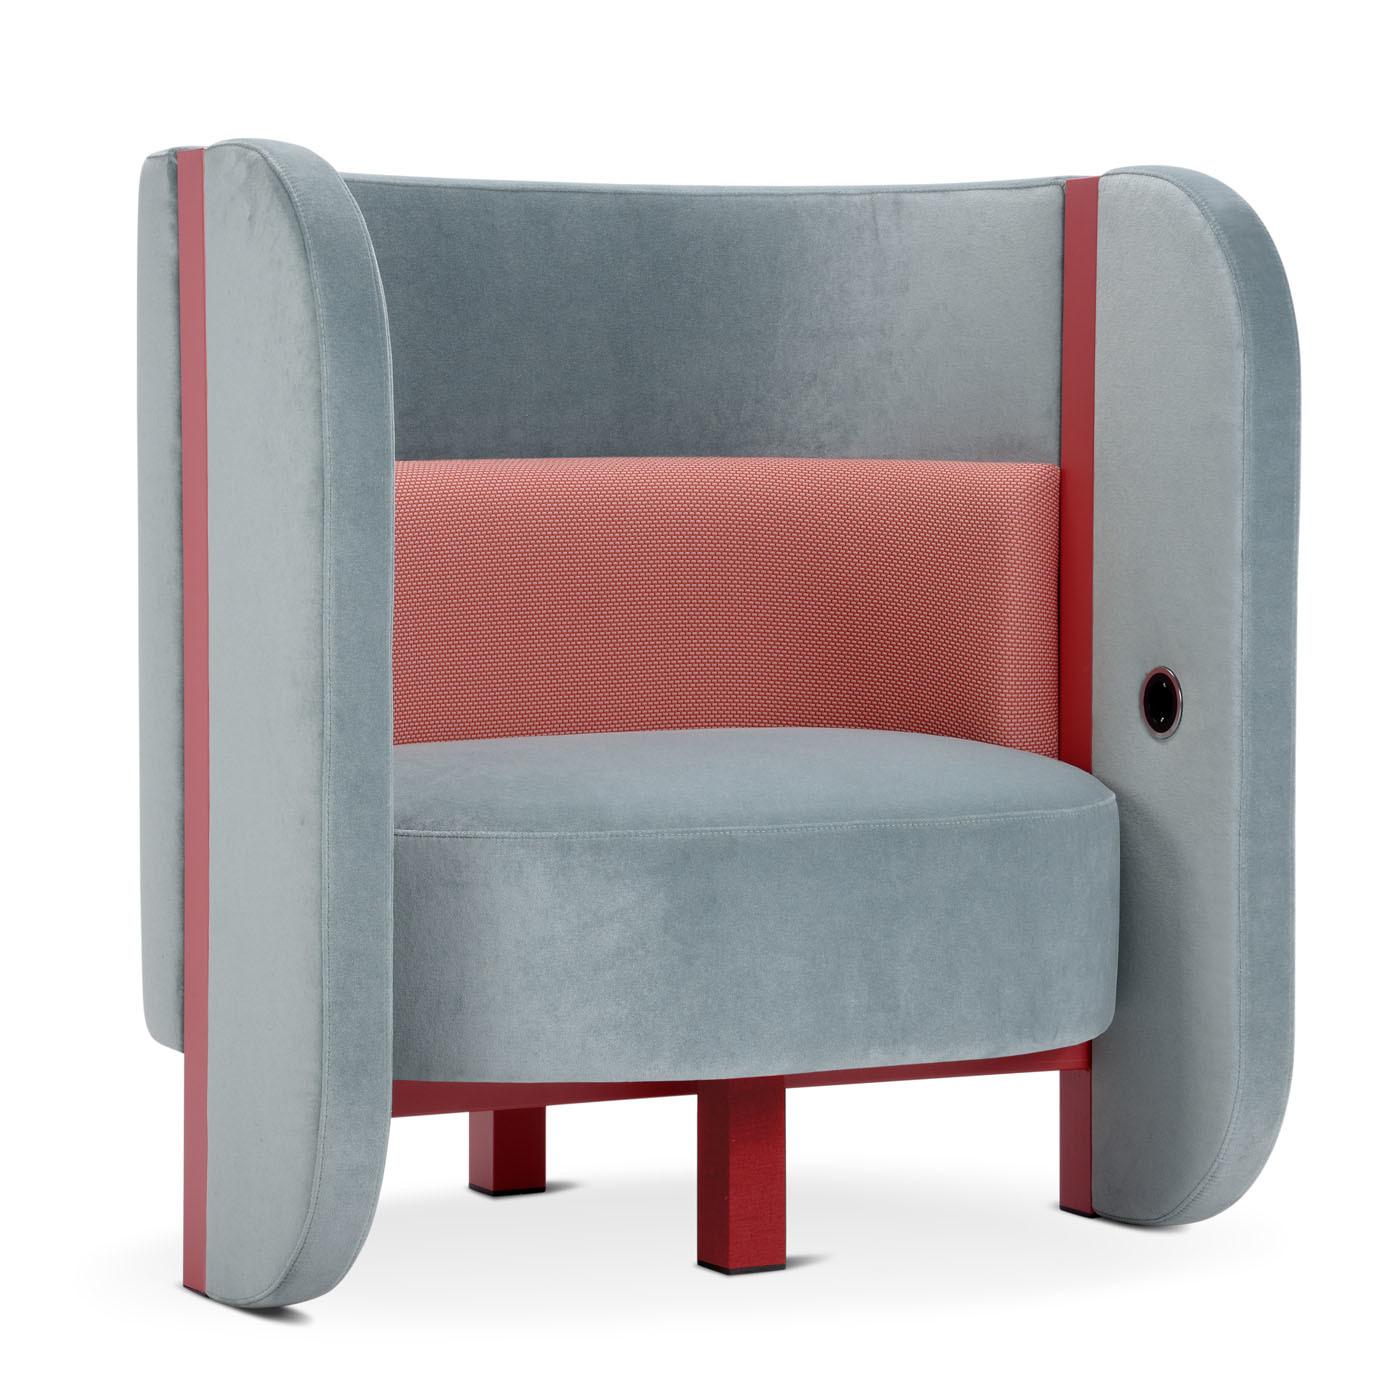 The armchair in non-deformable polyurethane foam of varying densities provides comfort and all-round relaxation due in part to the USB ports for recharging your mobile devices. The shape is characterized by two wings that enclose and protect, and